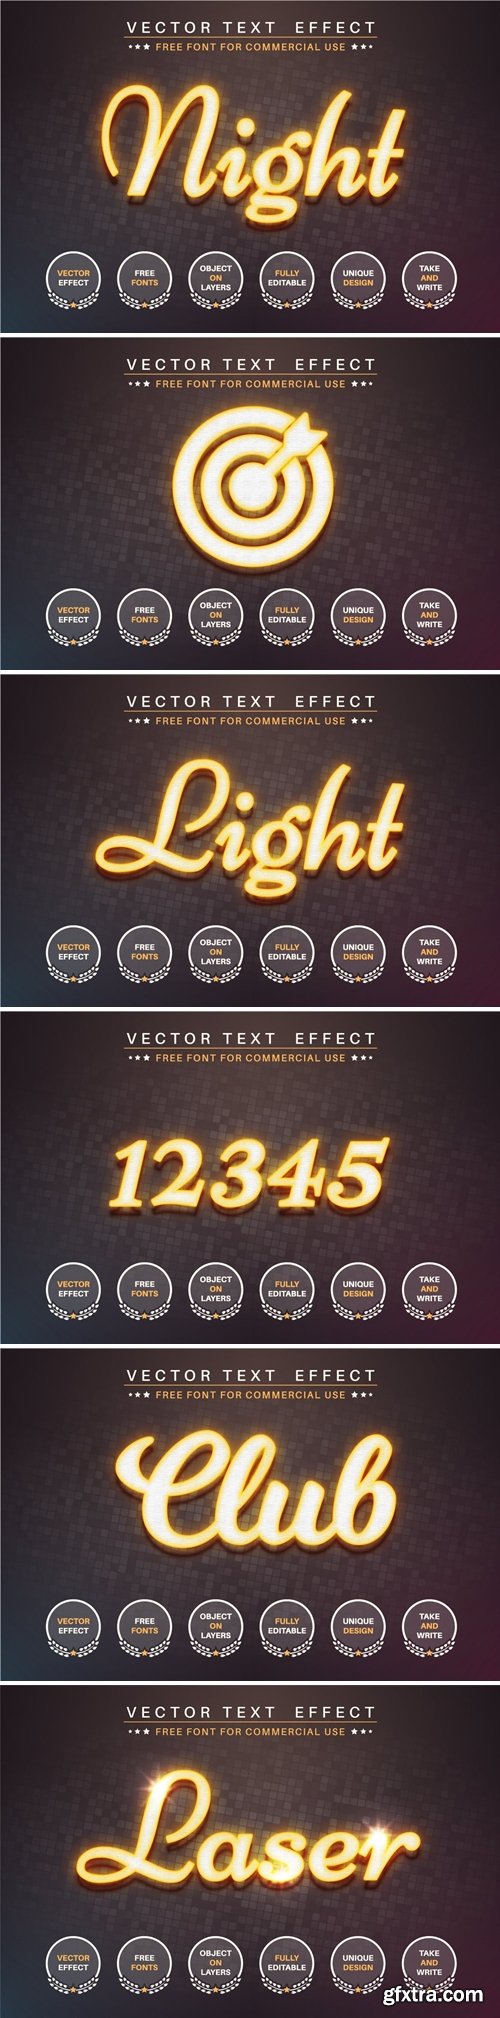 Yellow laser - editable text effect, font style